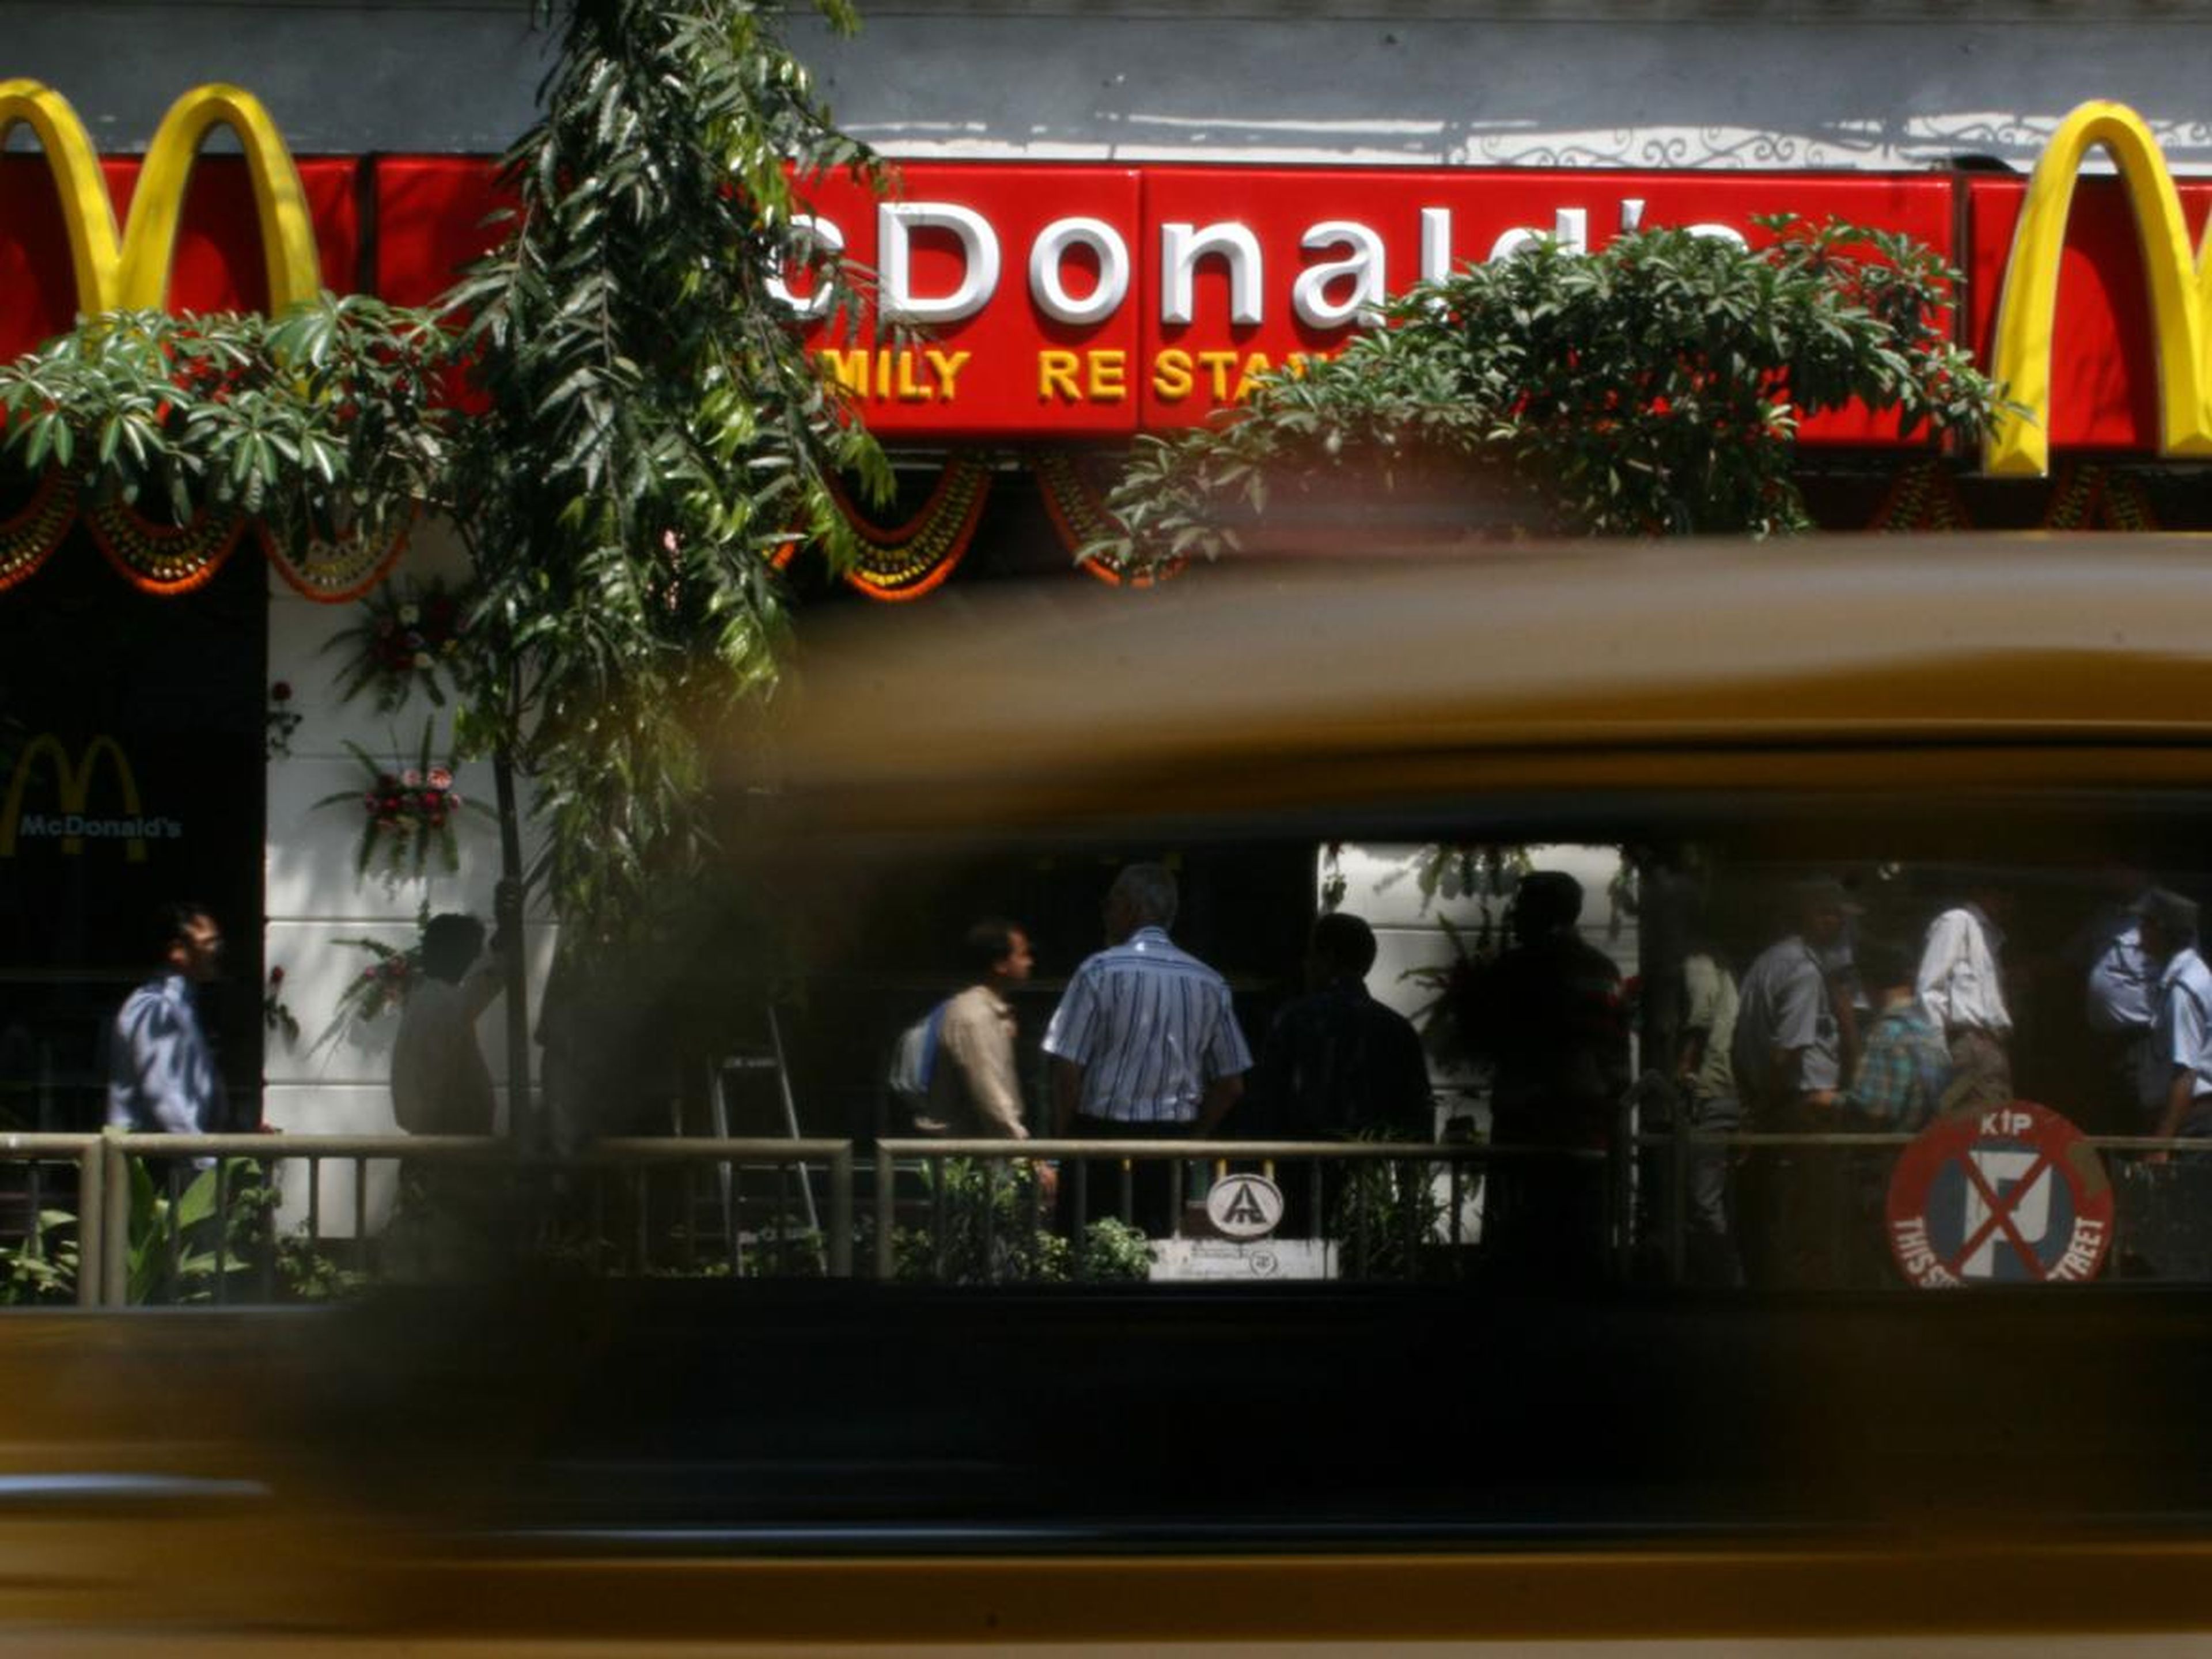 There are more than 400 McDonald's locations in India.